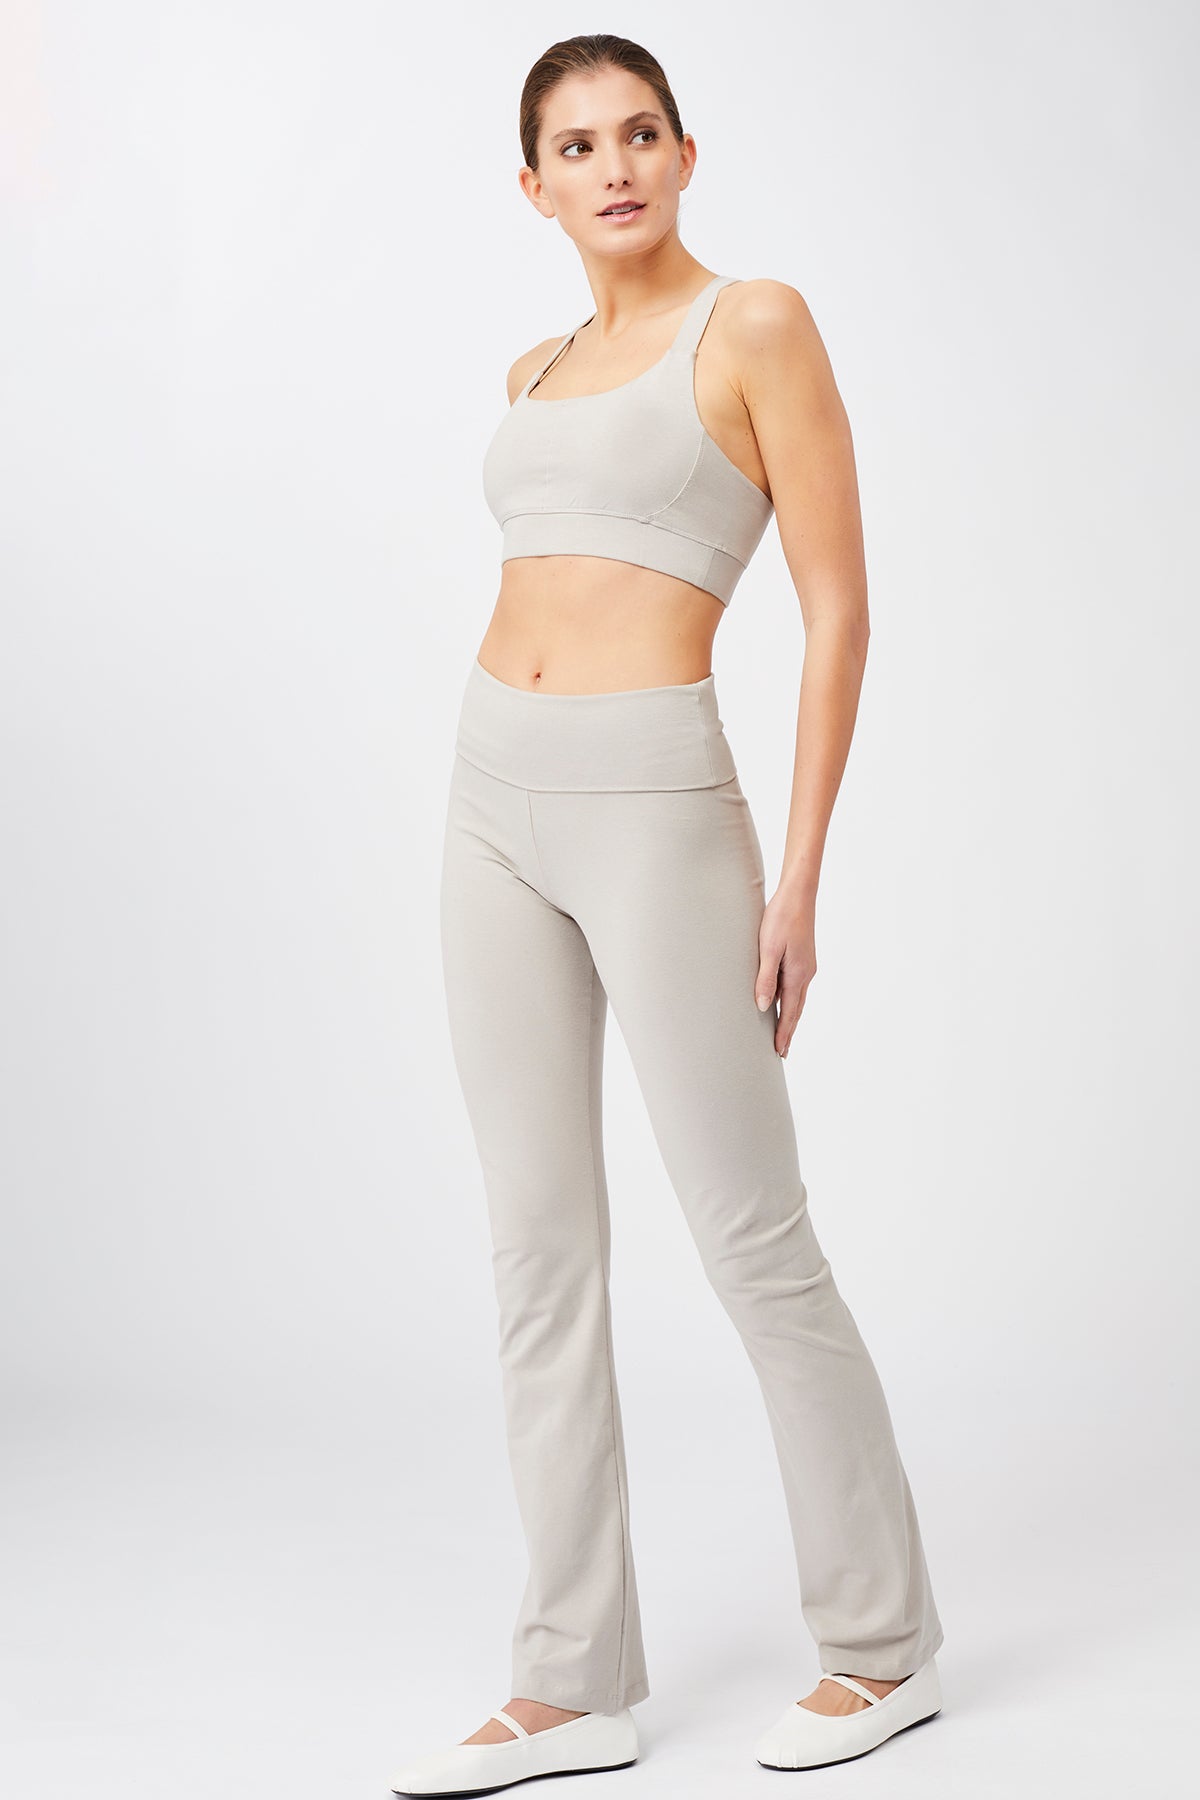 Extra Support Bra + Roll Down Pants (Pistacchio)